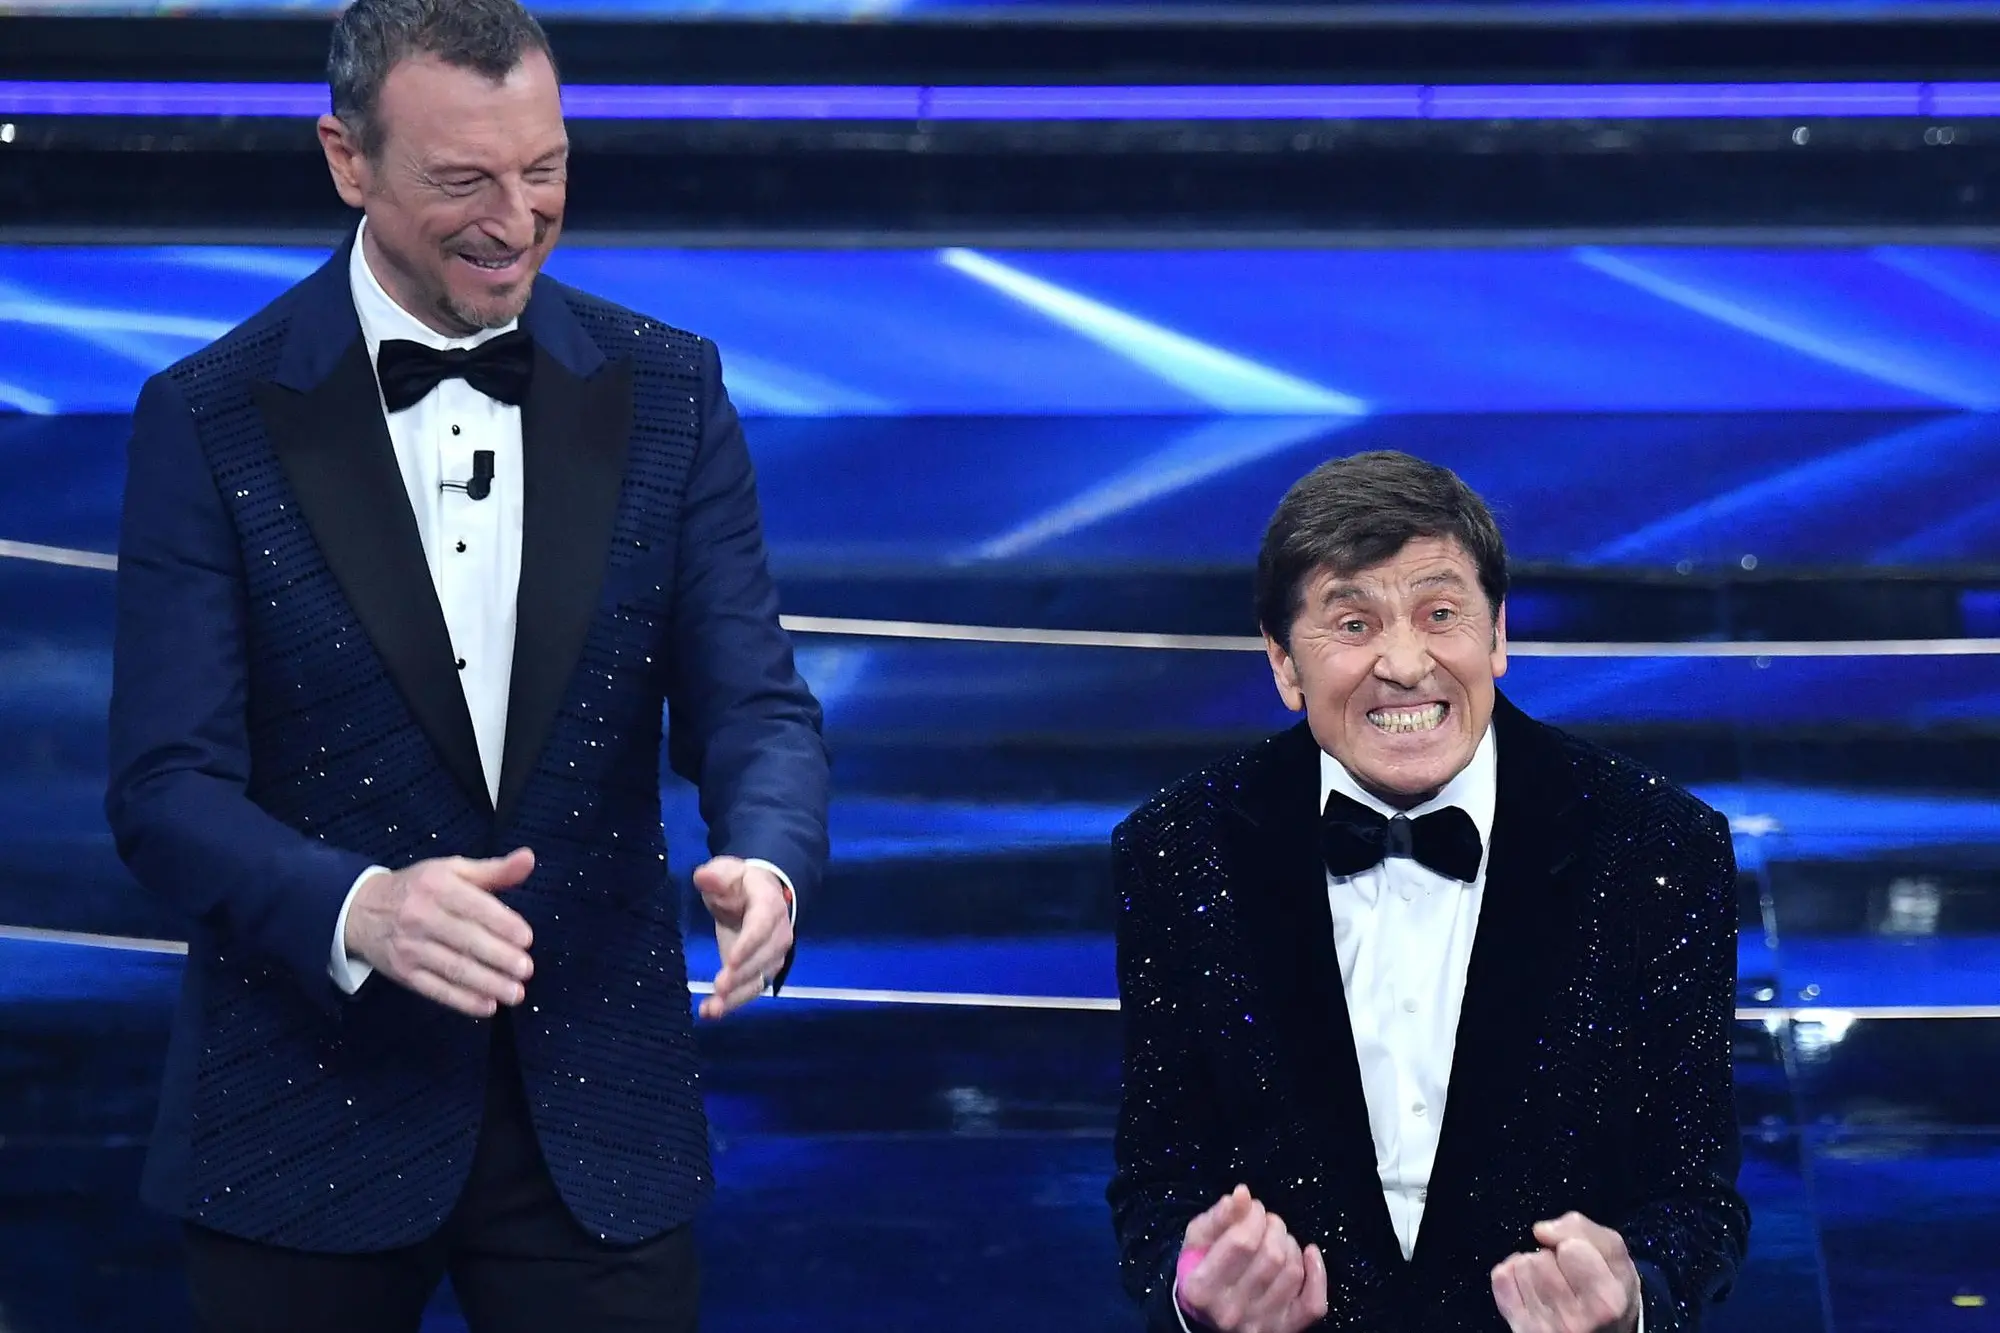 Sanremo Festival host and artistic director, Amadeus (L) and Italian singer Gianni Morandi (R) on stage at the Ariston theatre during the 72nd Sanremo Italian Song Festival, in Sanremo, Italy, 05 February 2022. The music festival runs from 01 to 05 February 2022. ANSA/ETTORE FERRARI